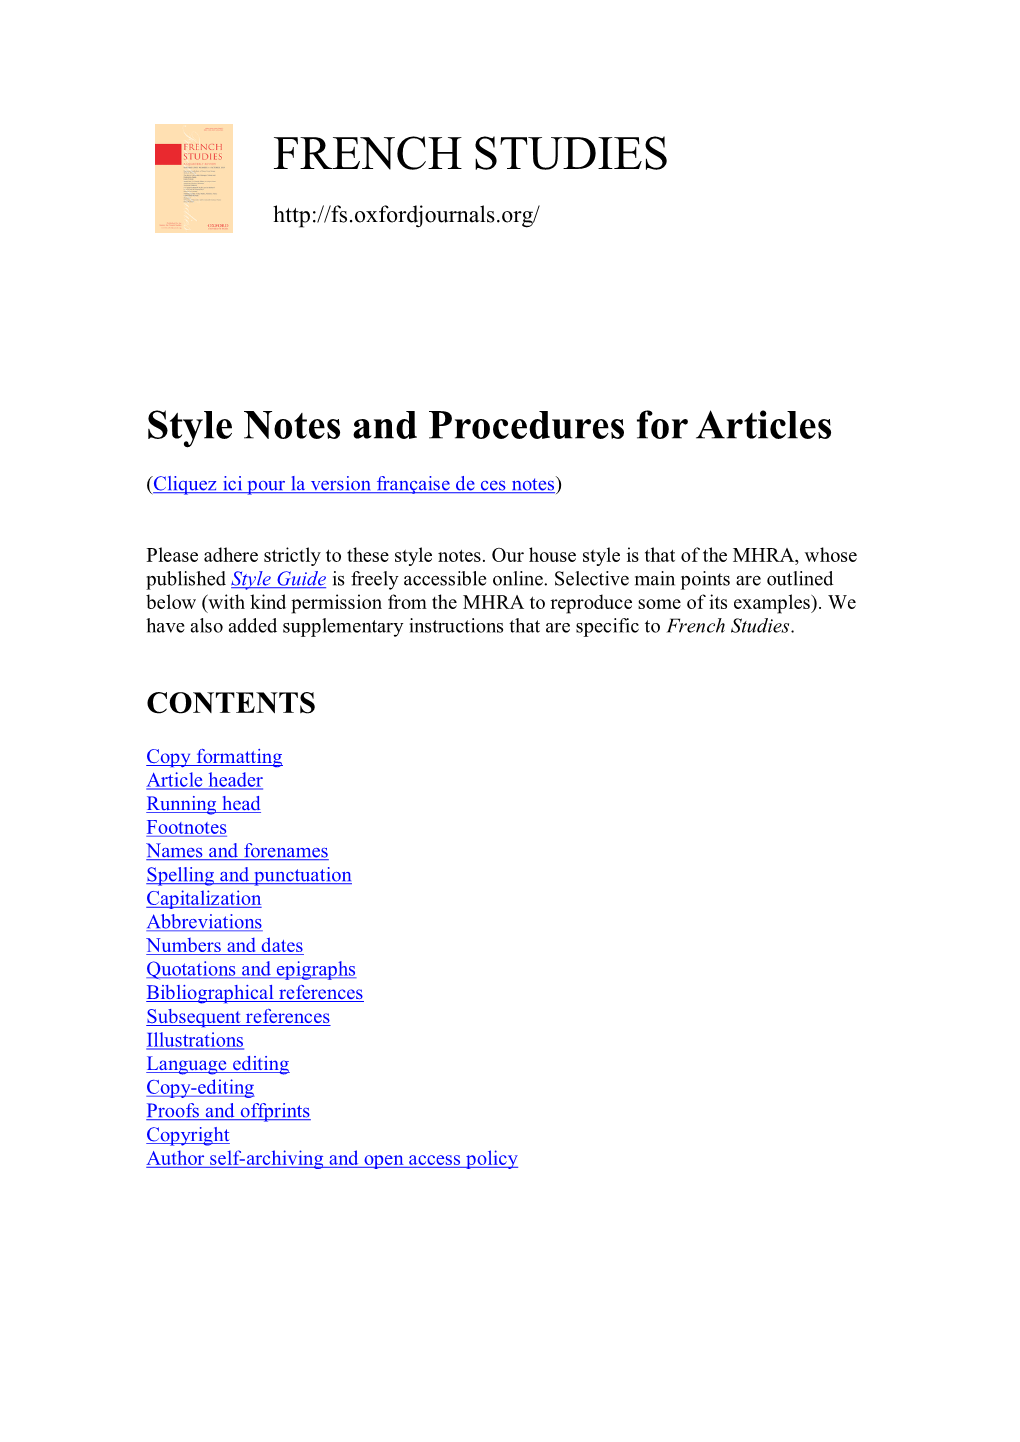 Style Notes for Articles